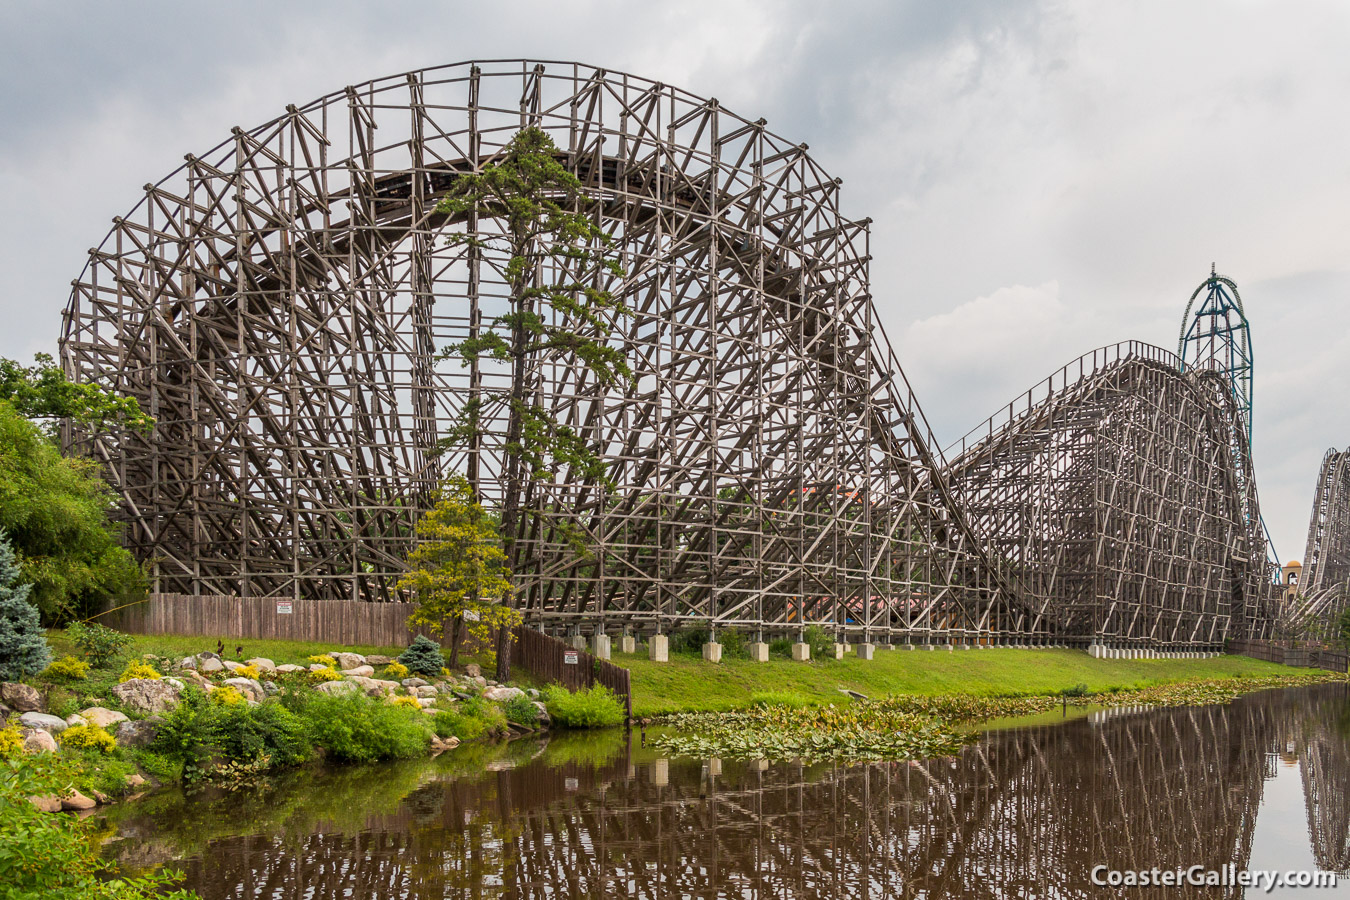 A list of the Intamin pre-fabricated wooden roller coasters.